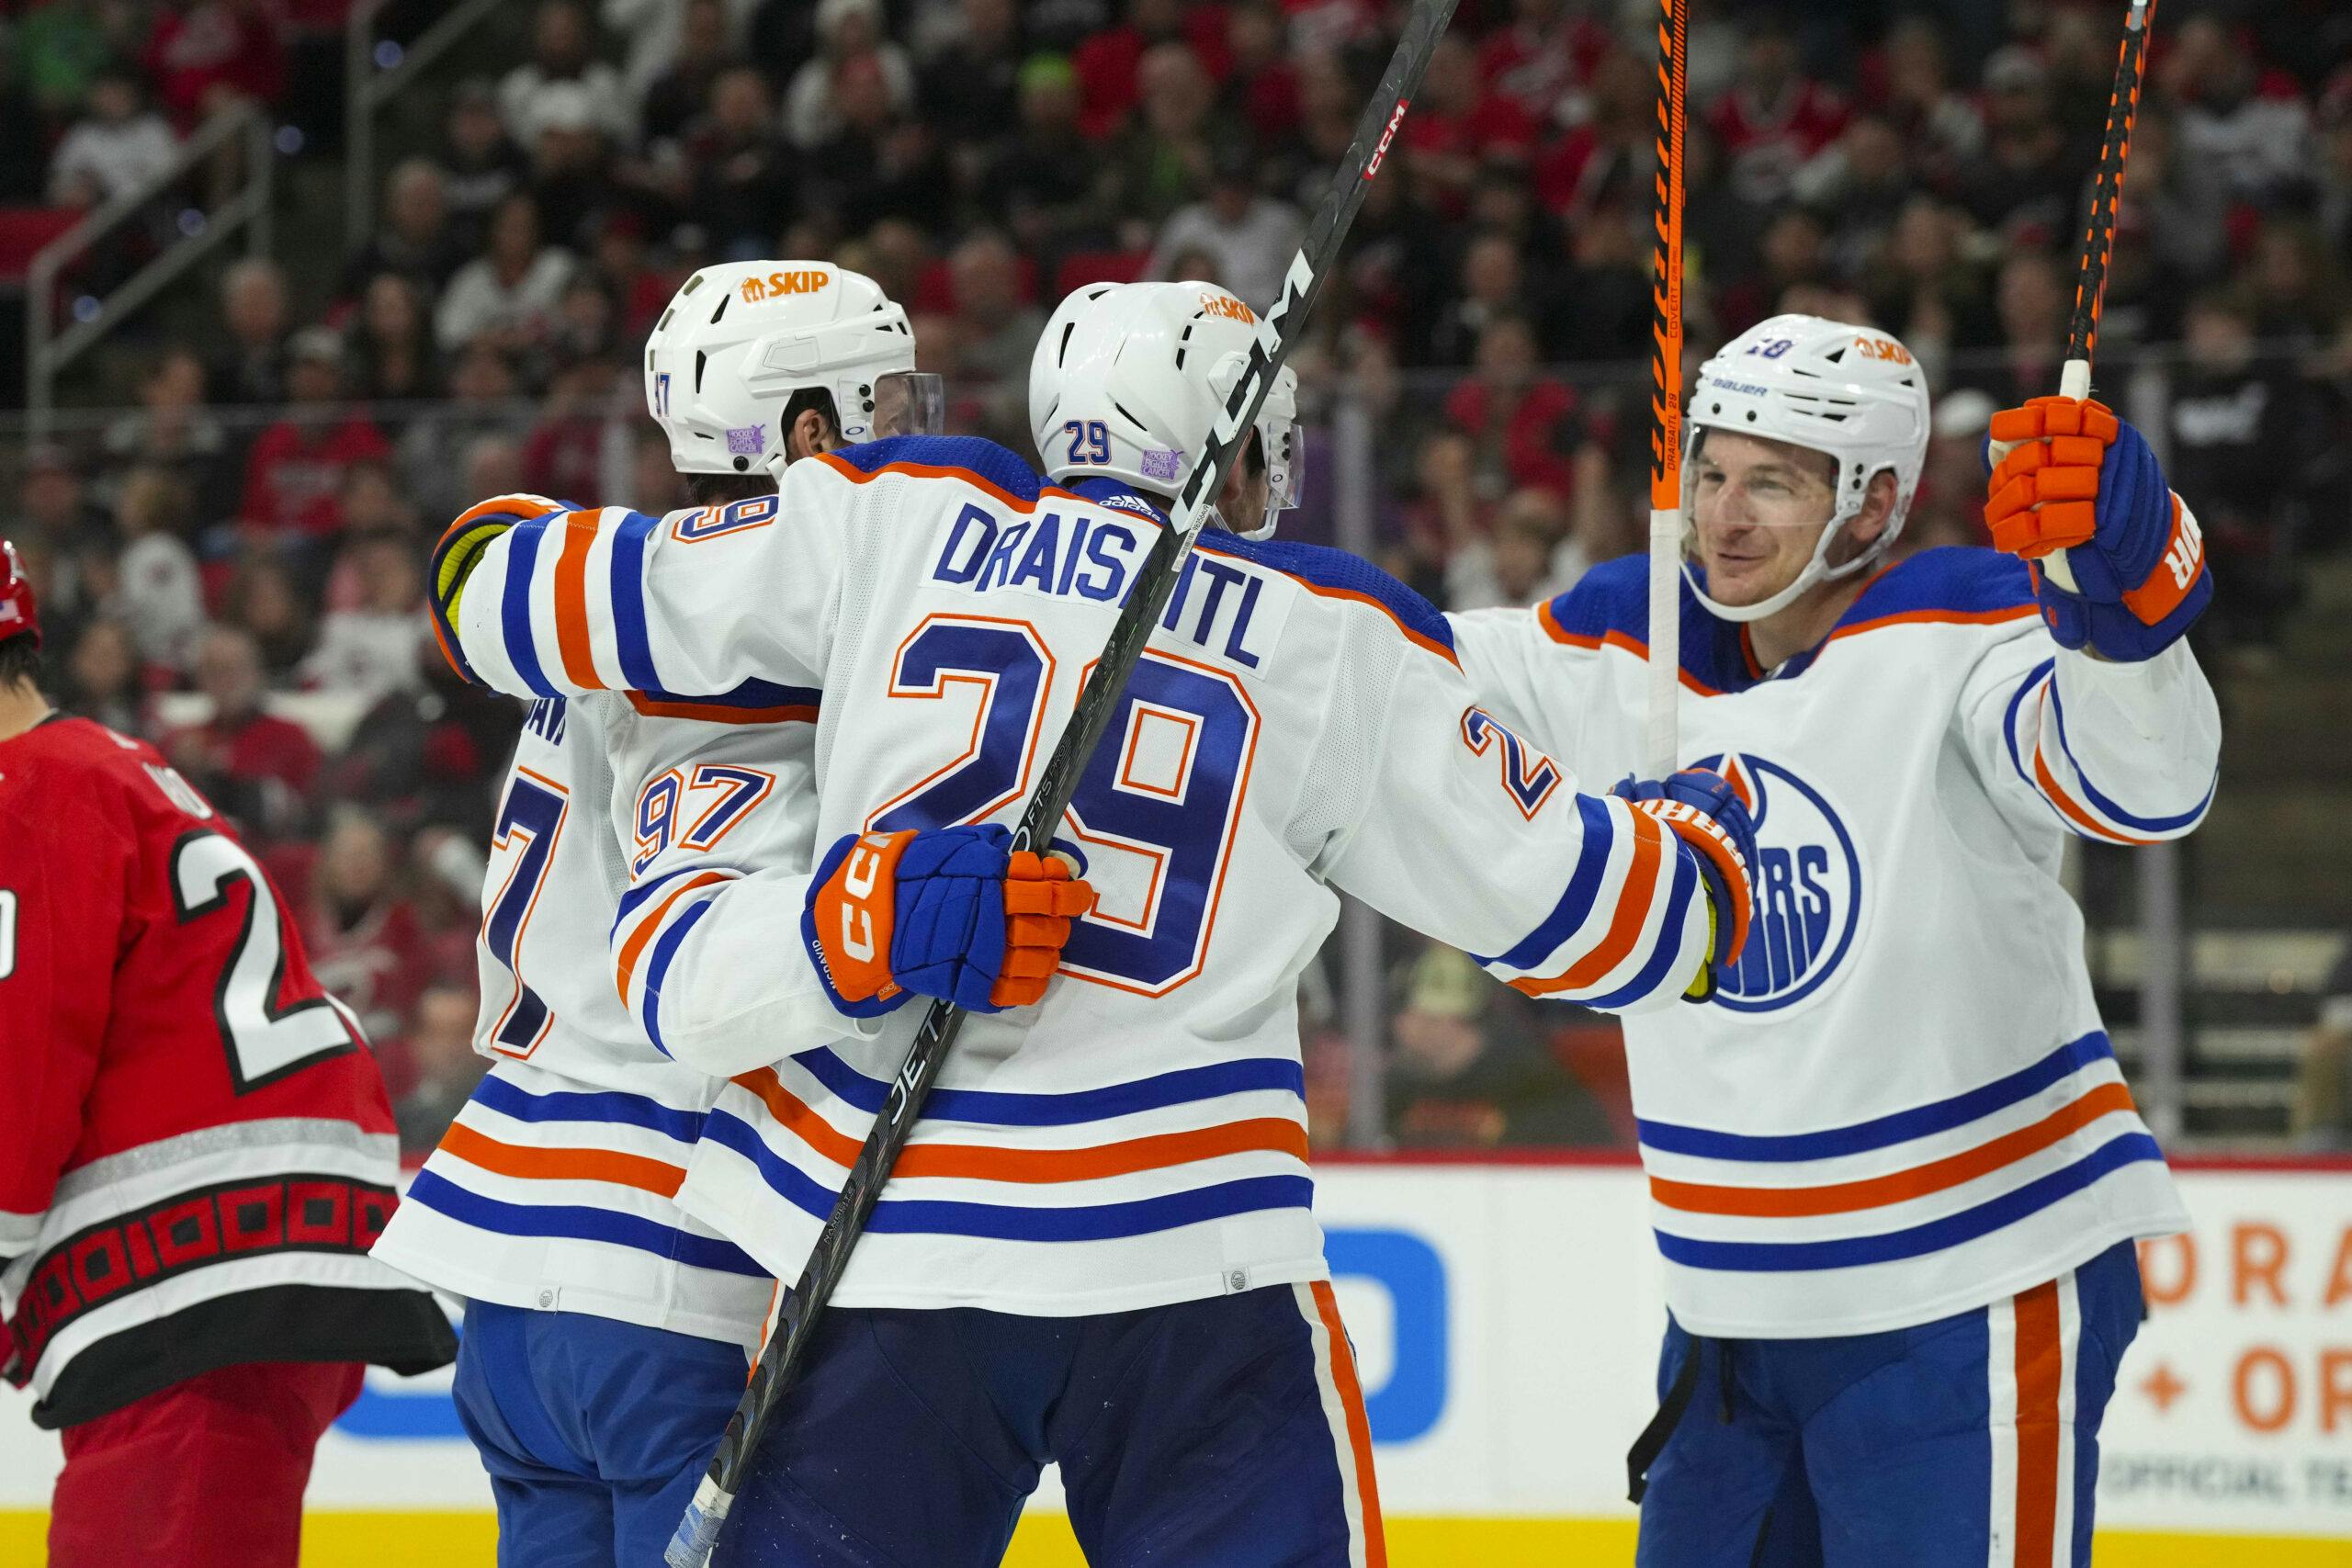 WATCH: Dylan Holloway scores first NHL goal - OilersNation